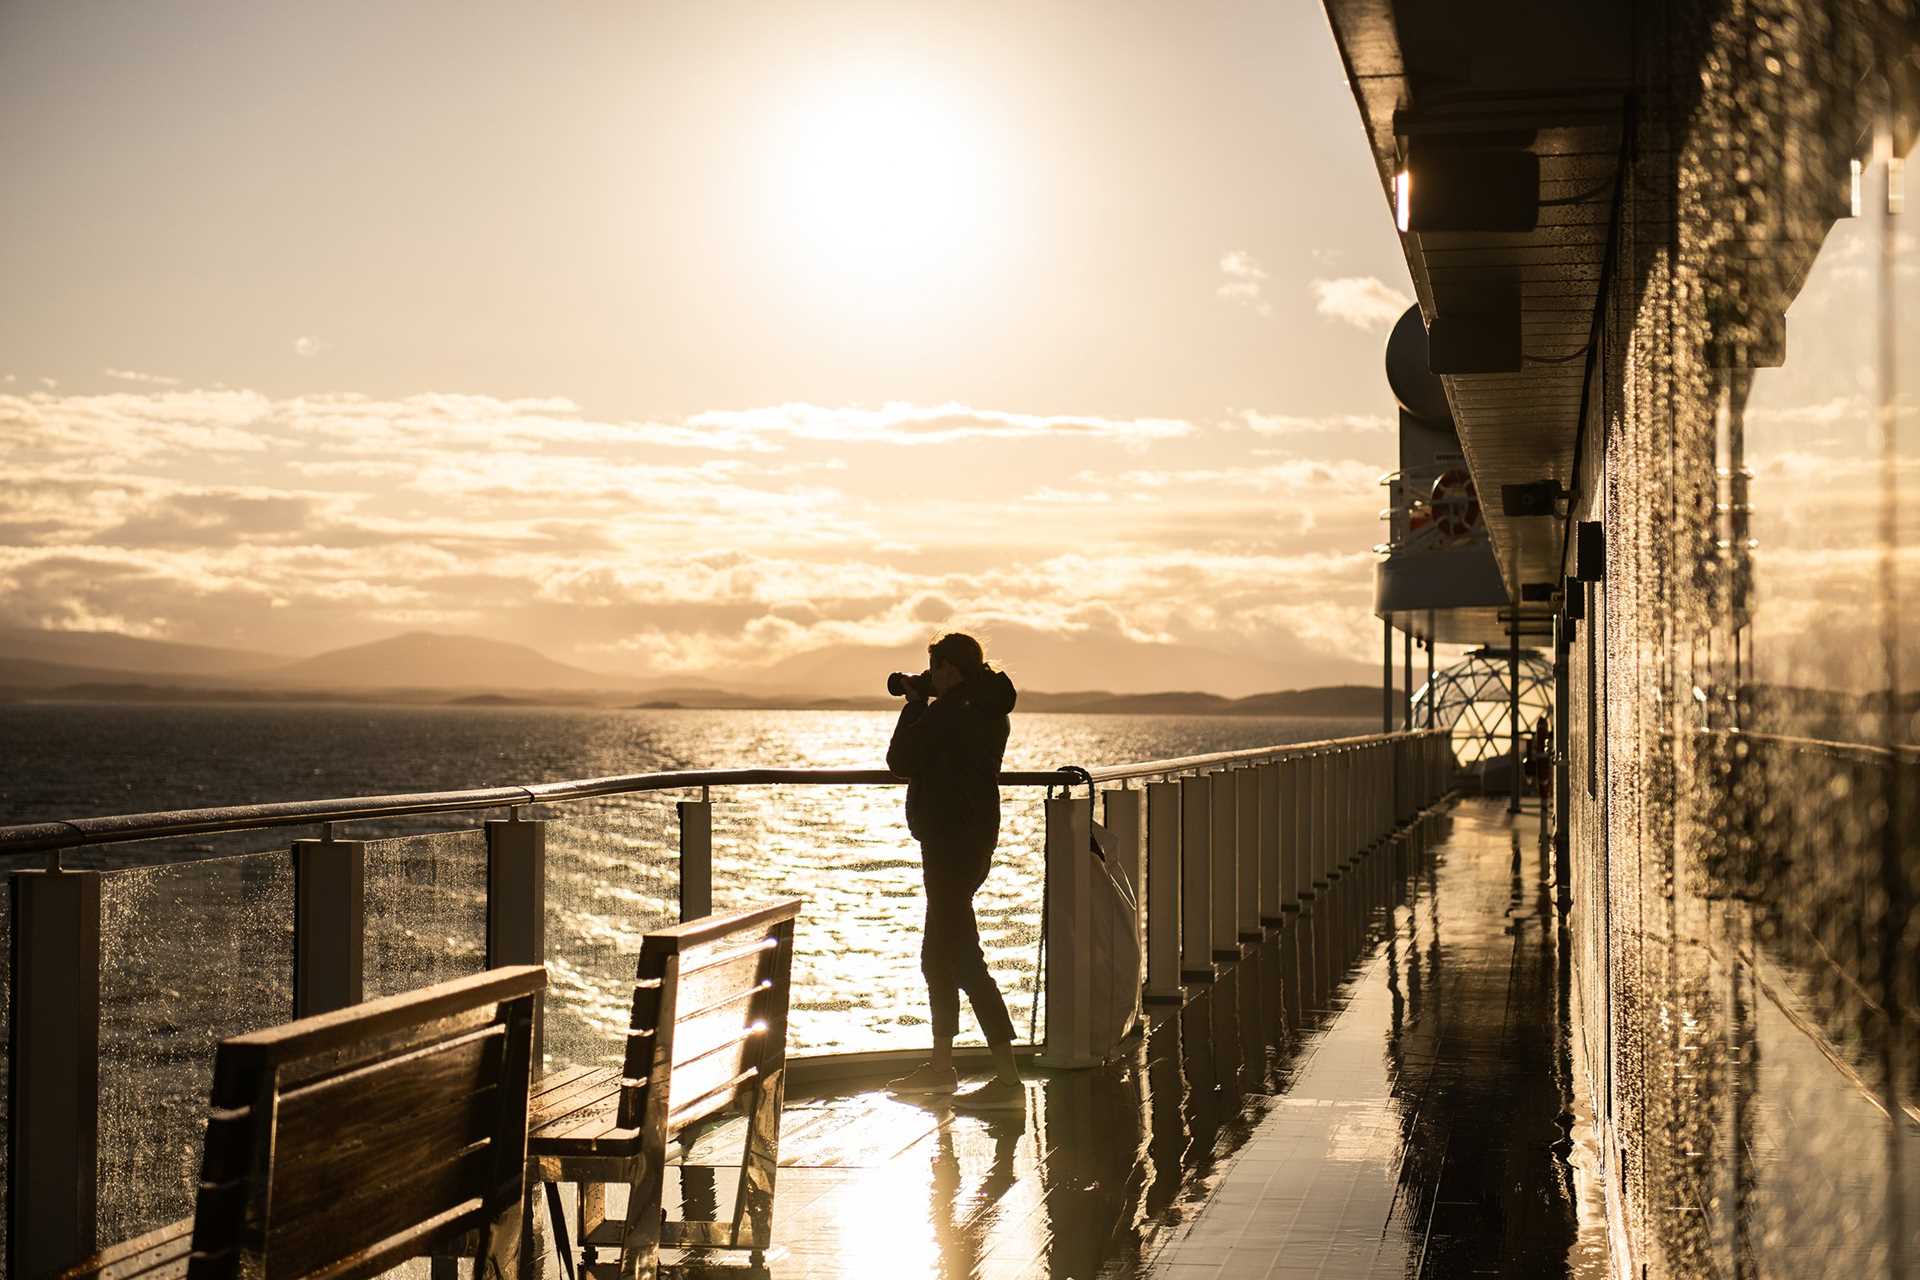 A guest photographs the horizon from the deck of the National Geographic Resolution during golden hour.